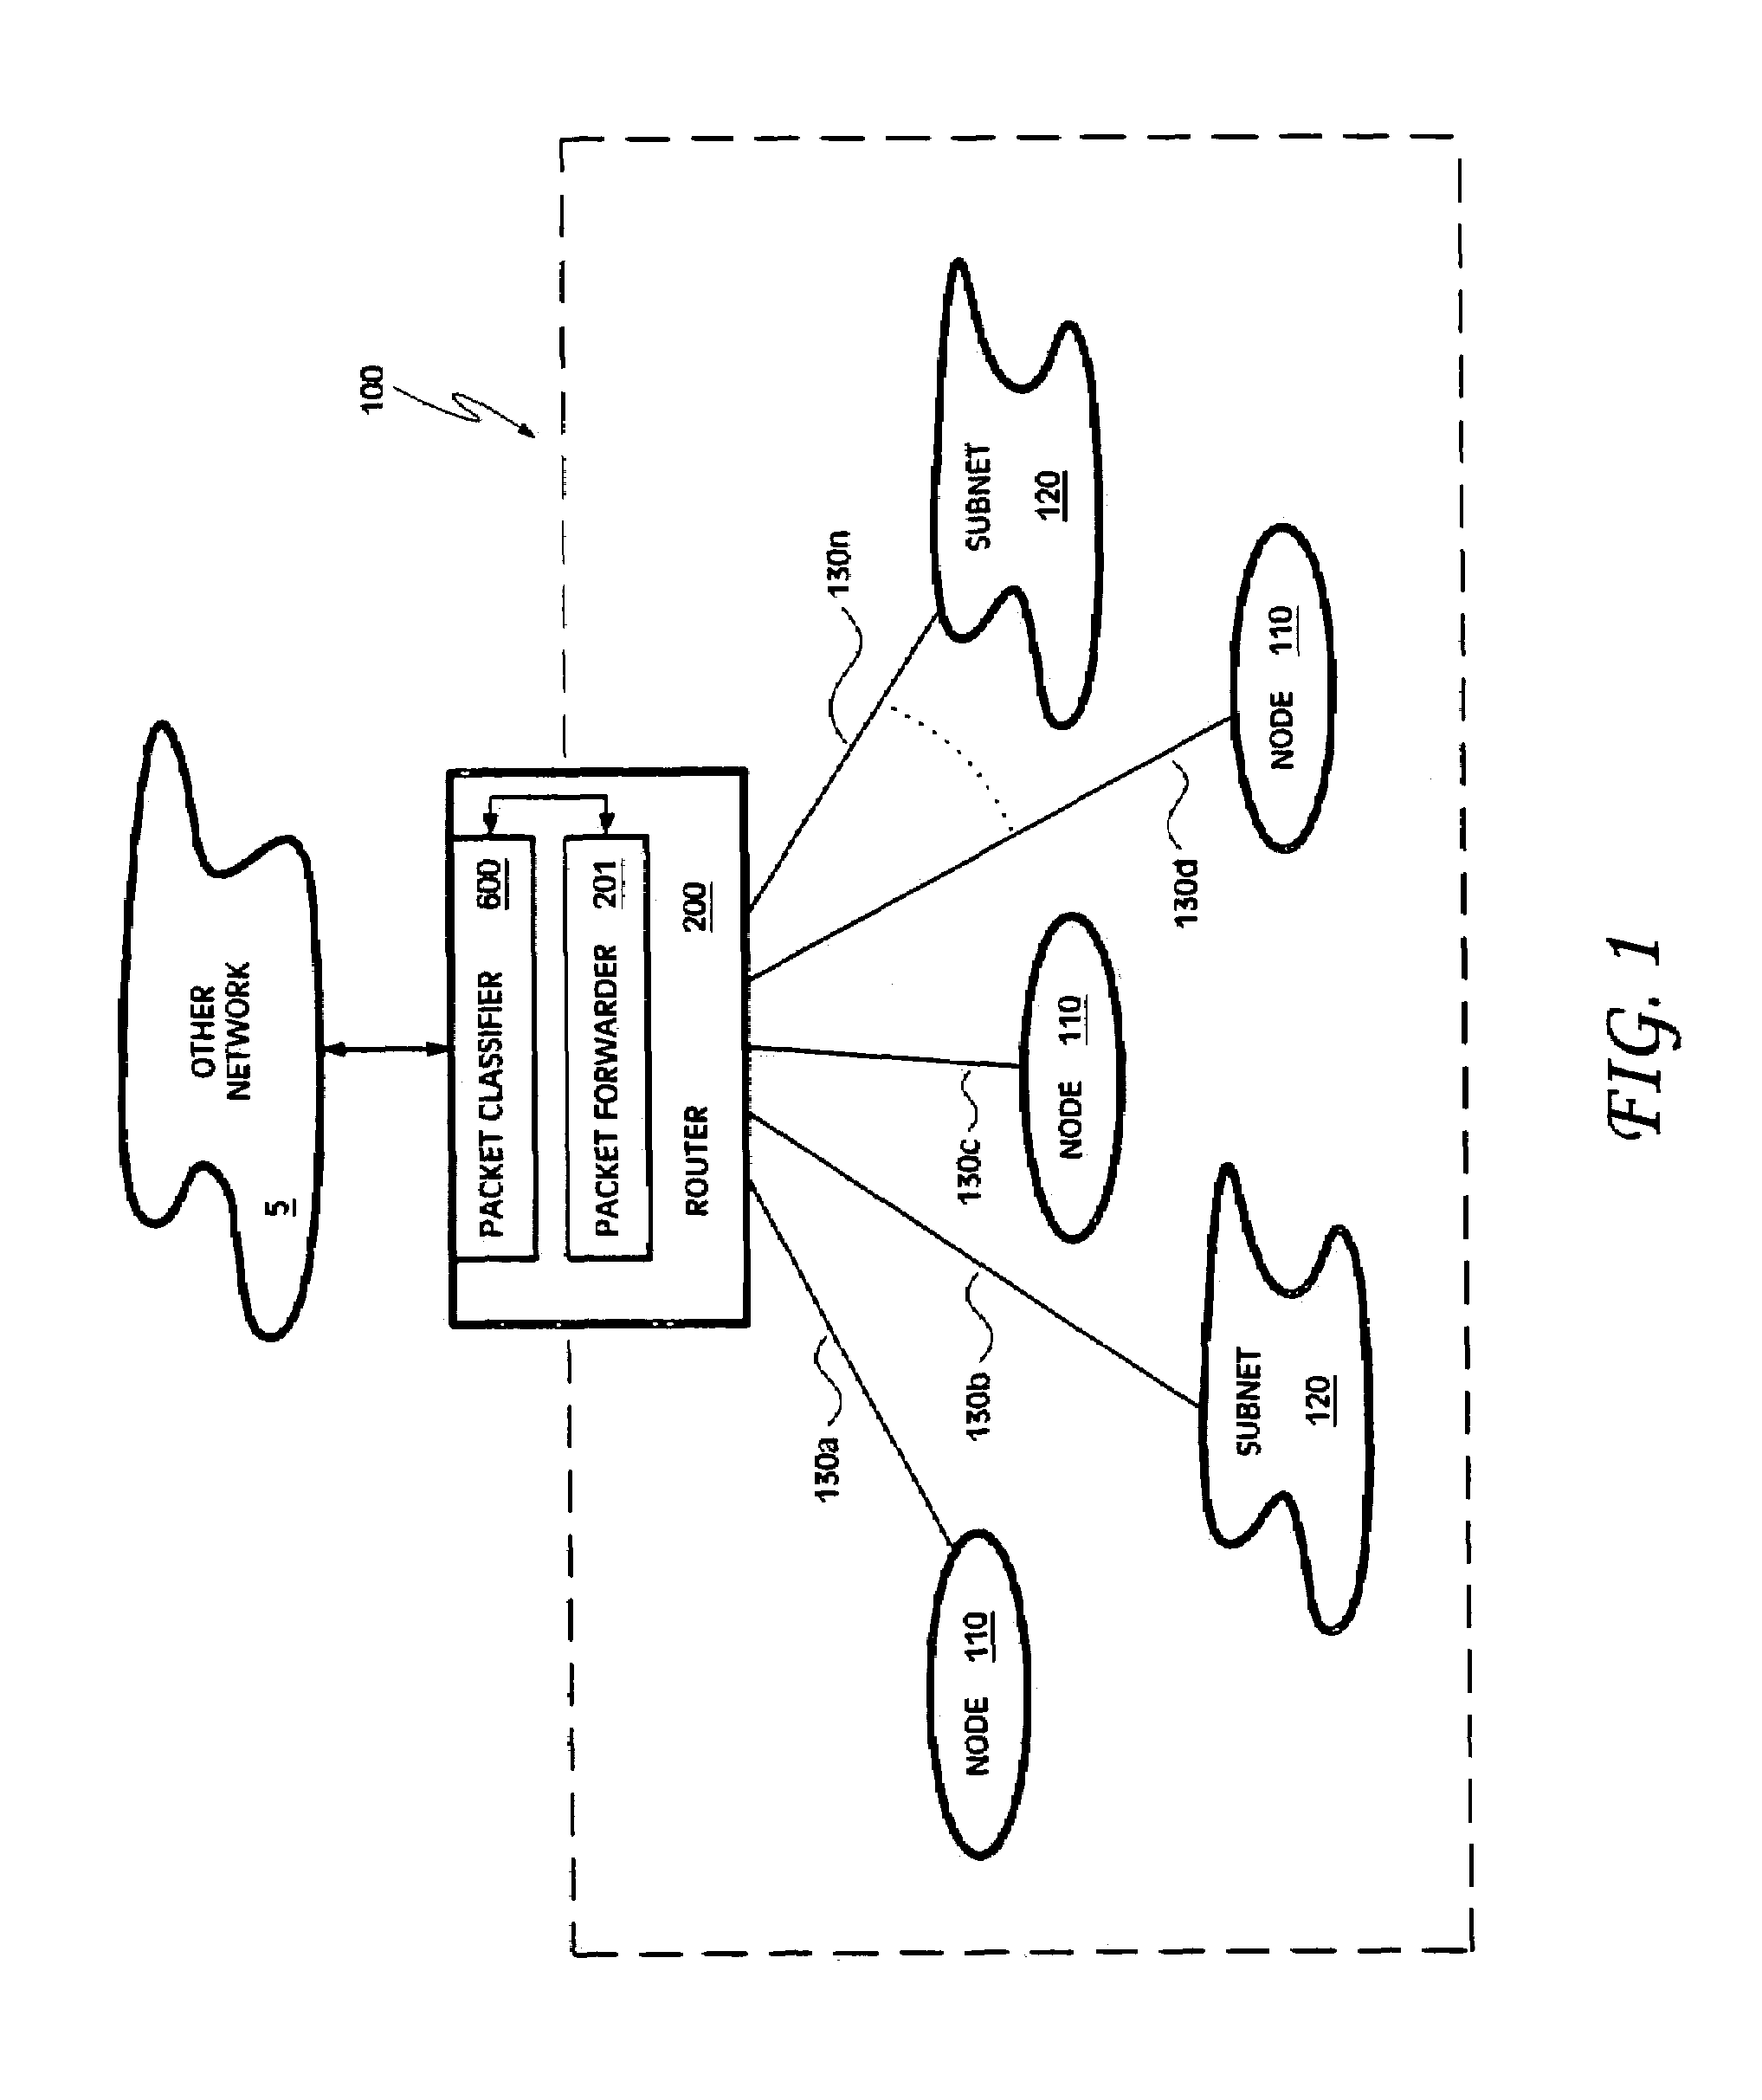 Method and apparatus for two-stage packet classification using most specific filter matching and transport level sharing